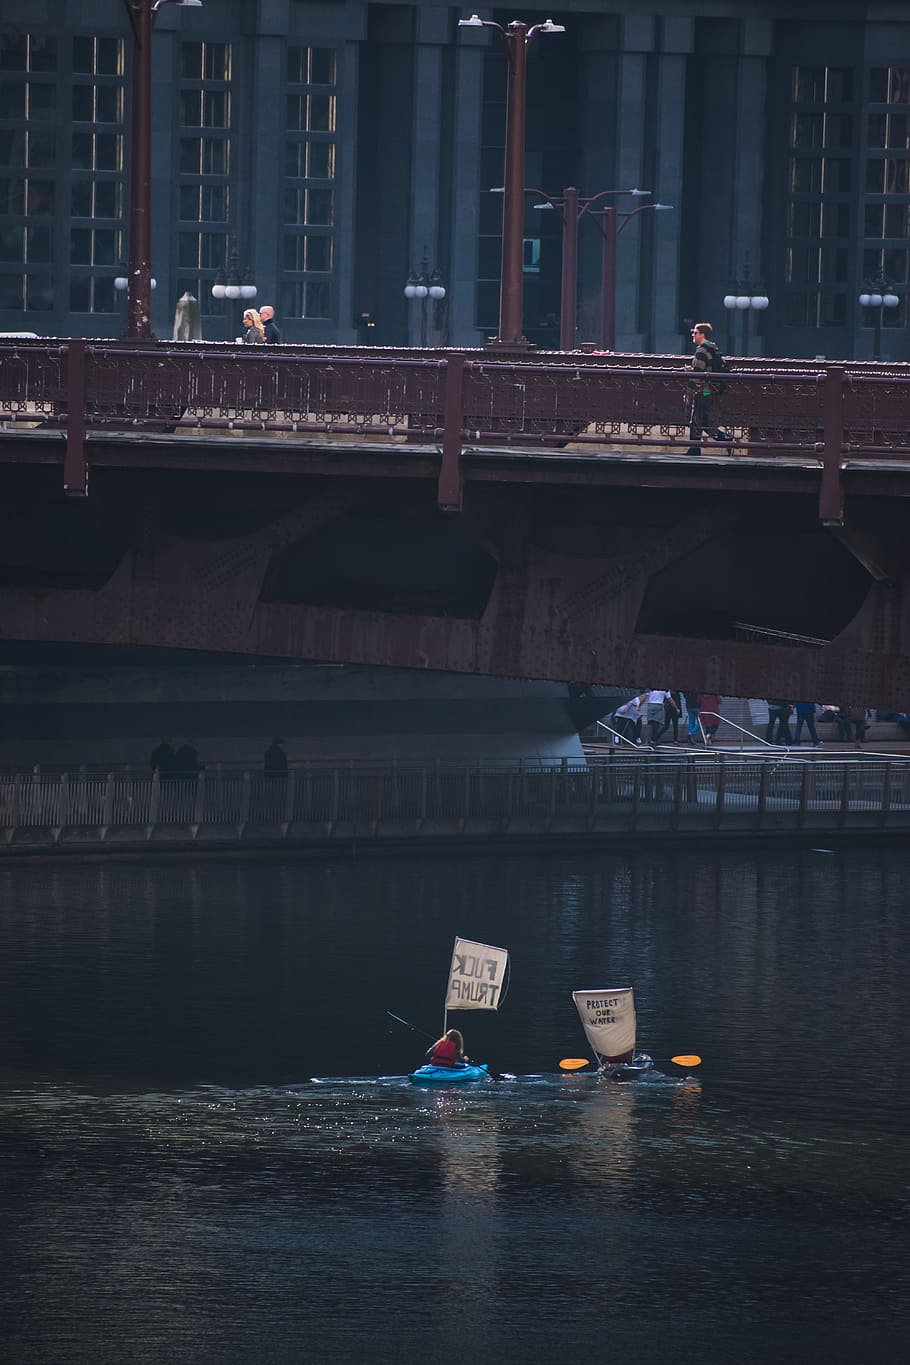 woman riding on blue kayak on body of water, protest, river, bridge